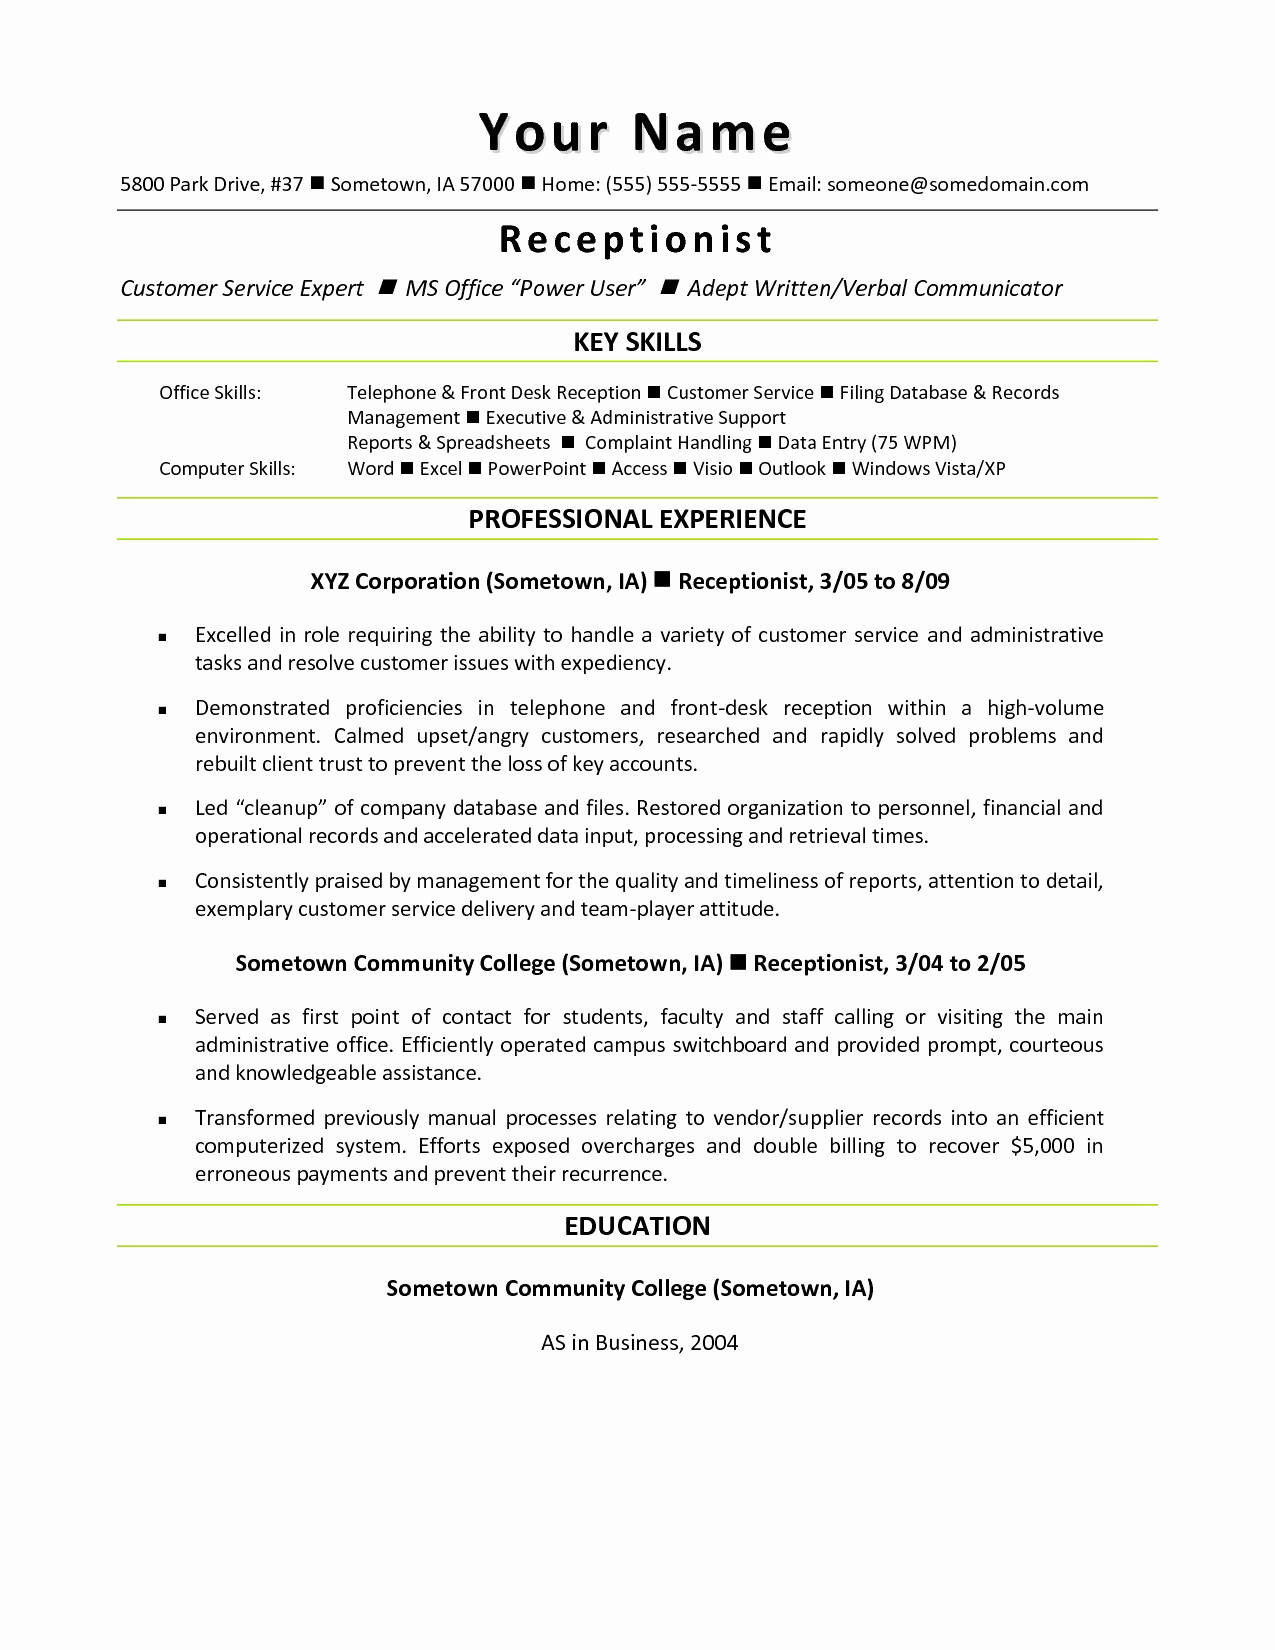 letter of agreement template Collection-Letter Agreement Template Lovely Sample Cover Letter for Resume Pdf format 3-t